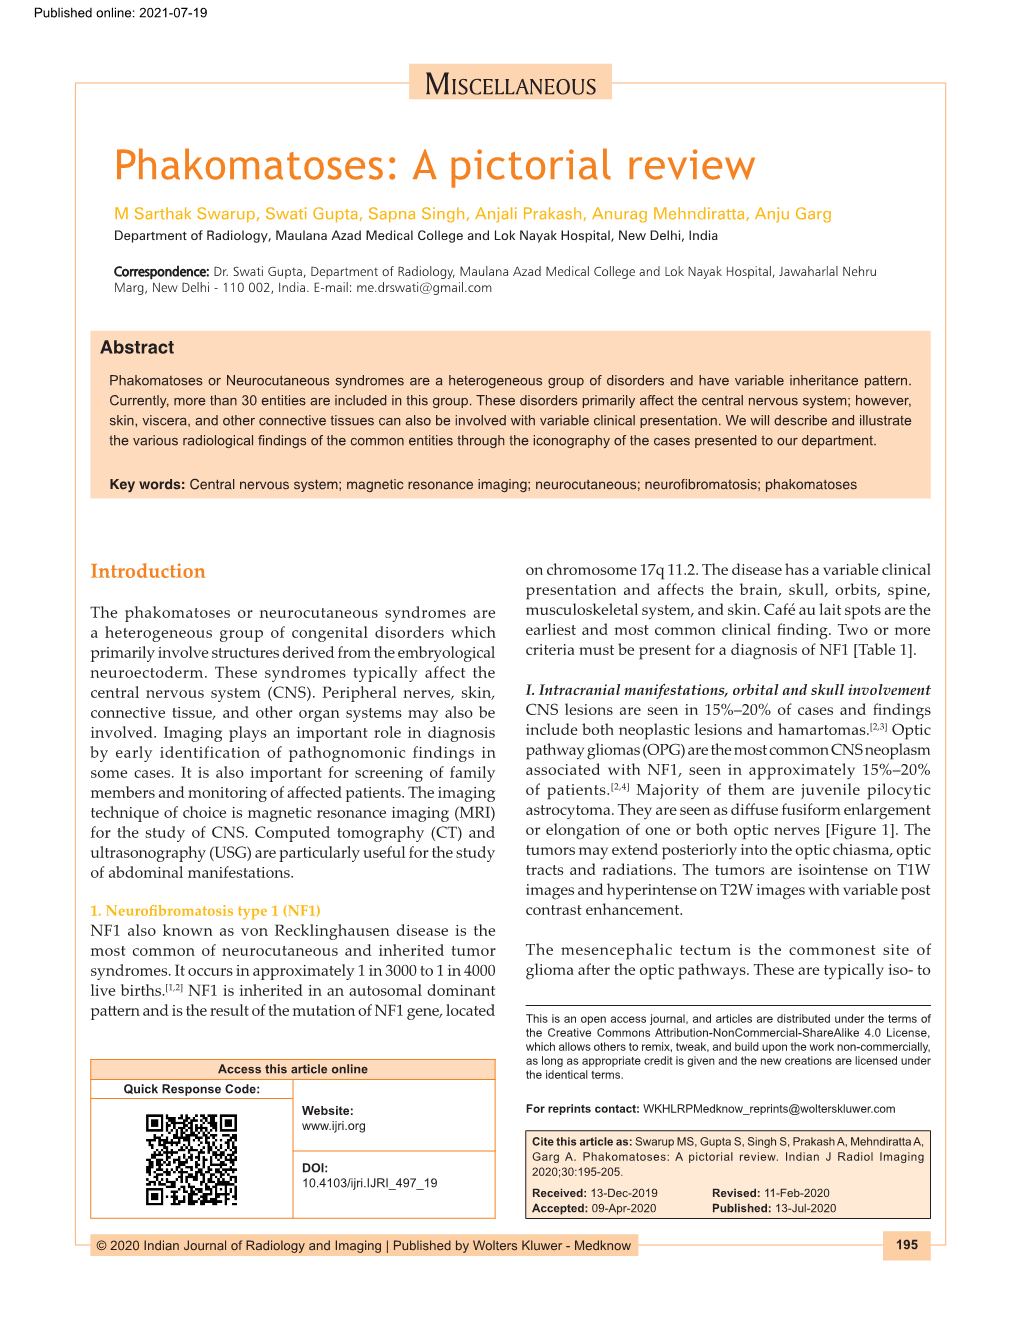 Phakomatoses: a Pictorial Review